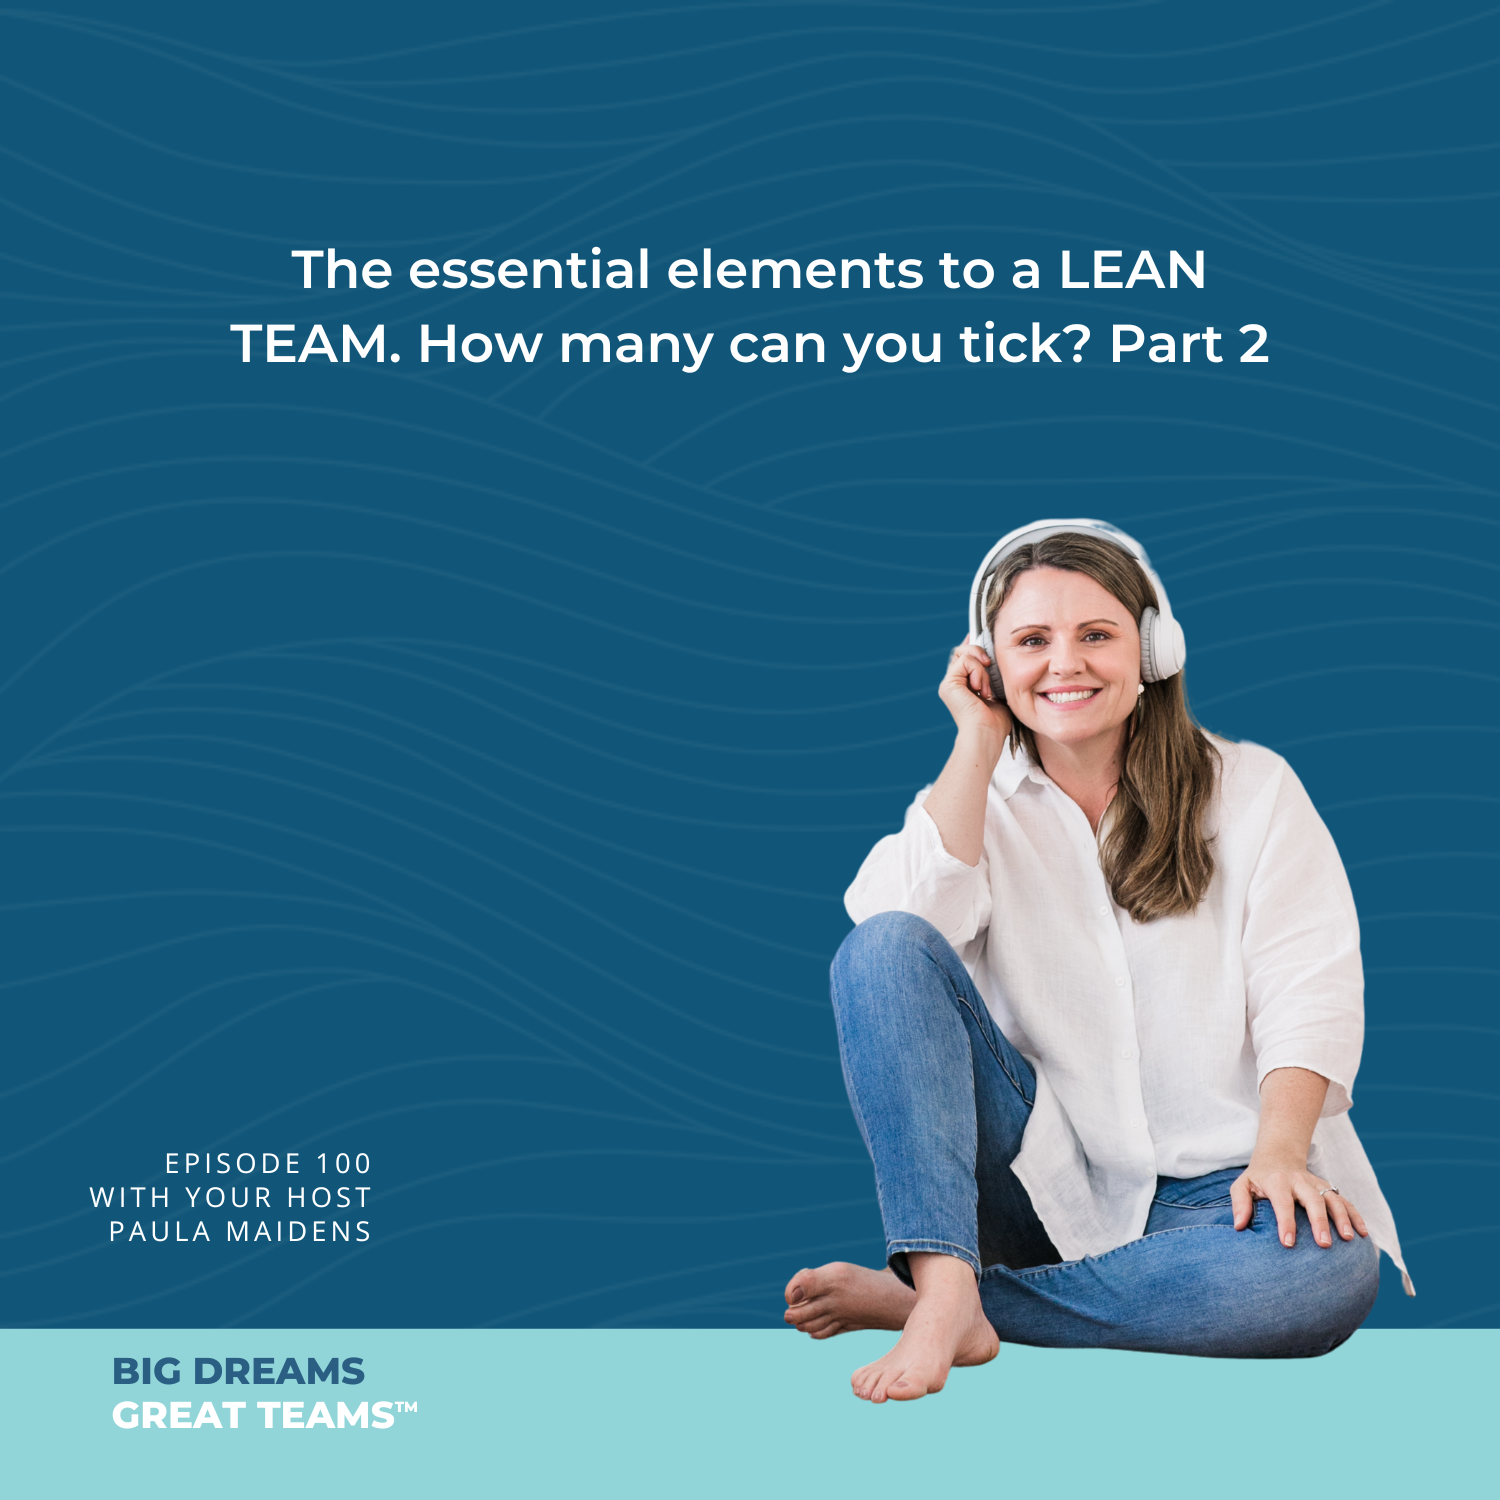 The essential elements to a LEAN TEAM. How many can you tick? Part 2